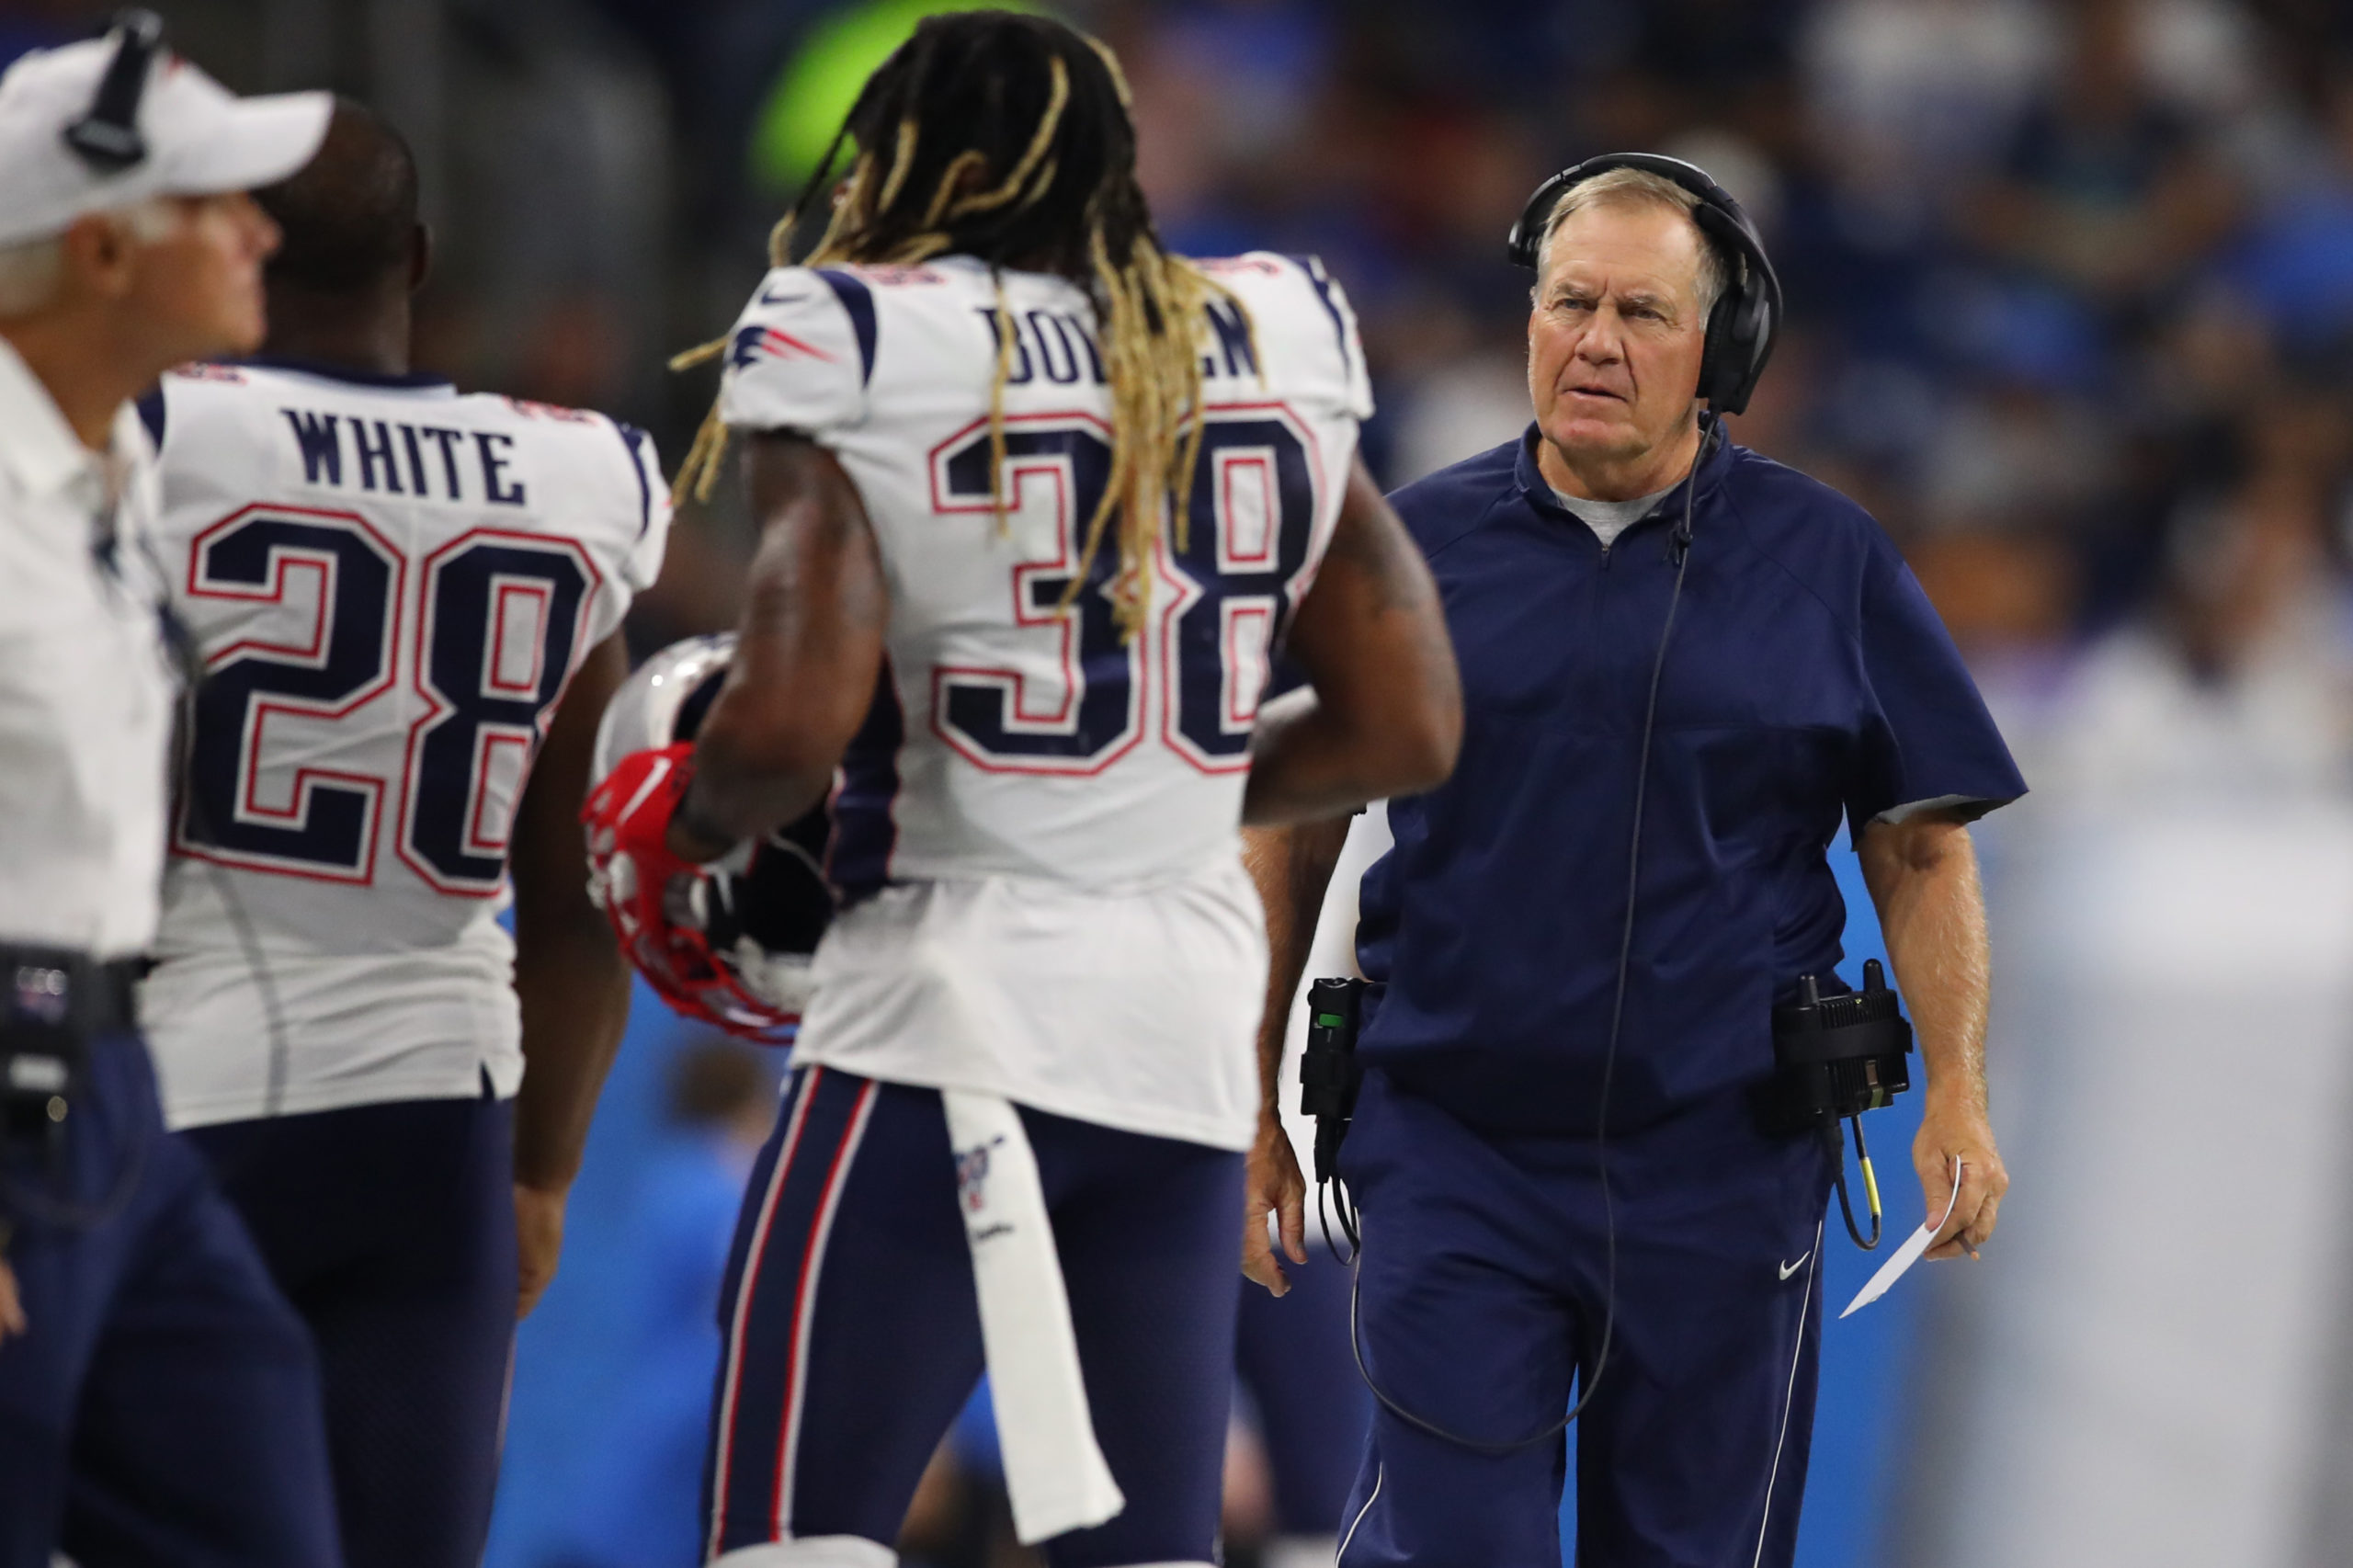 DETROIT, MICHIGAN - AUGUST 08: Head coach Bill Belichick of the New England Patriots on the sidelines during a preseason game against the Detroit Lions at Ford Field on August 08, 2019 in Detroit, Michigan. Gregory Shamus/Getty Images